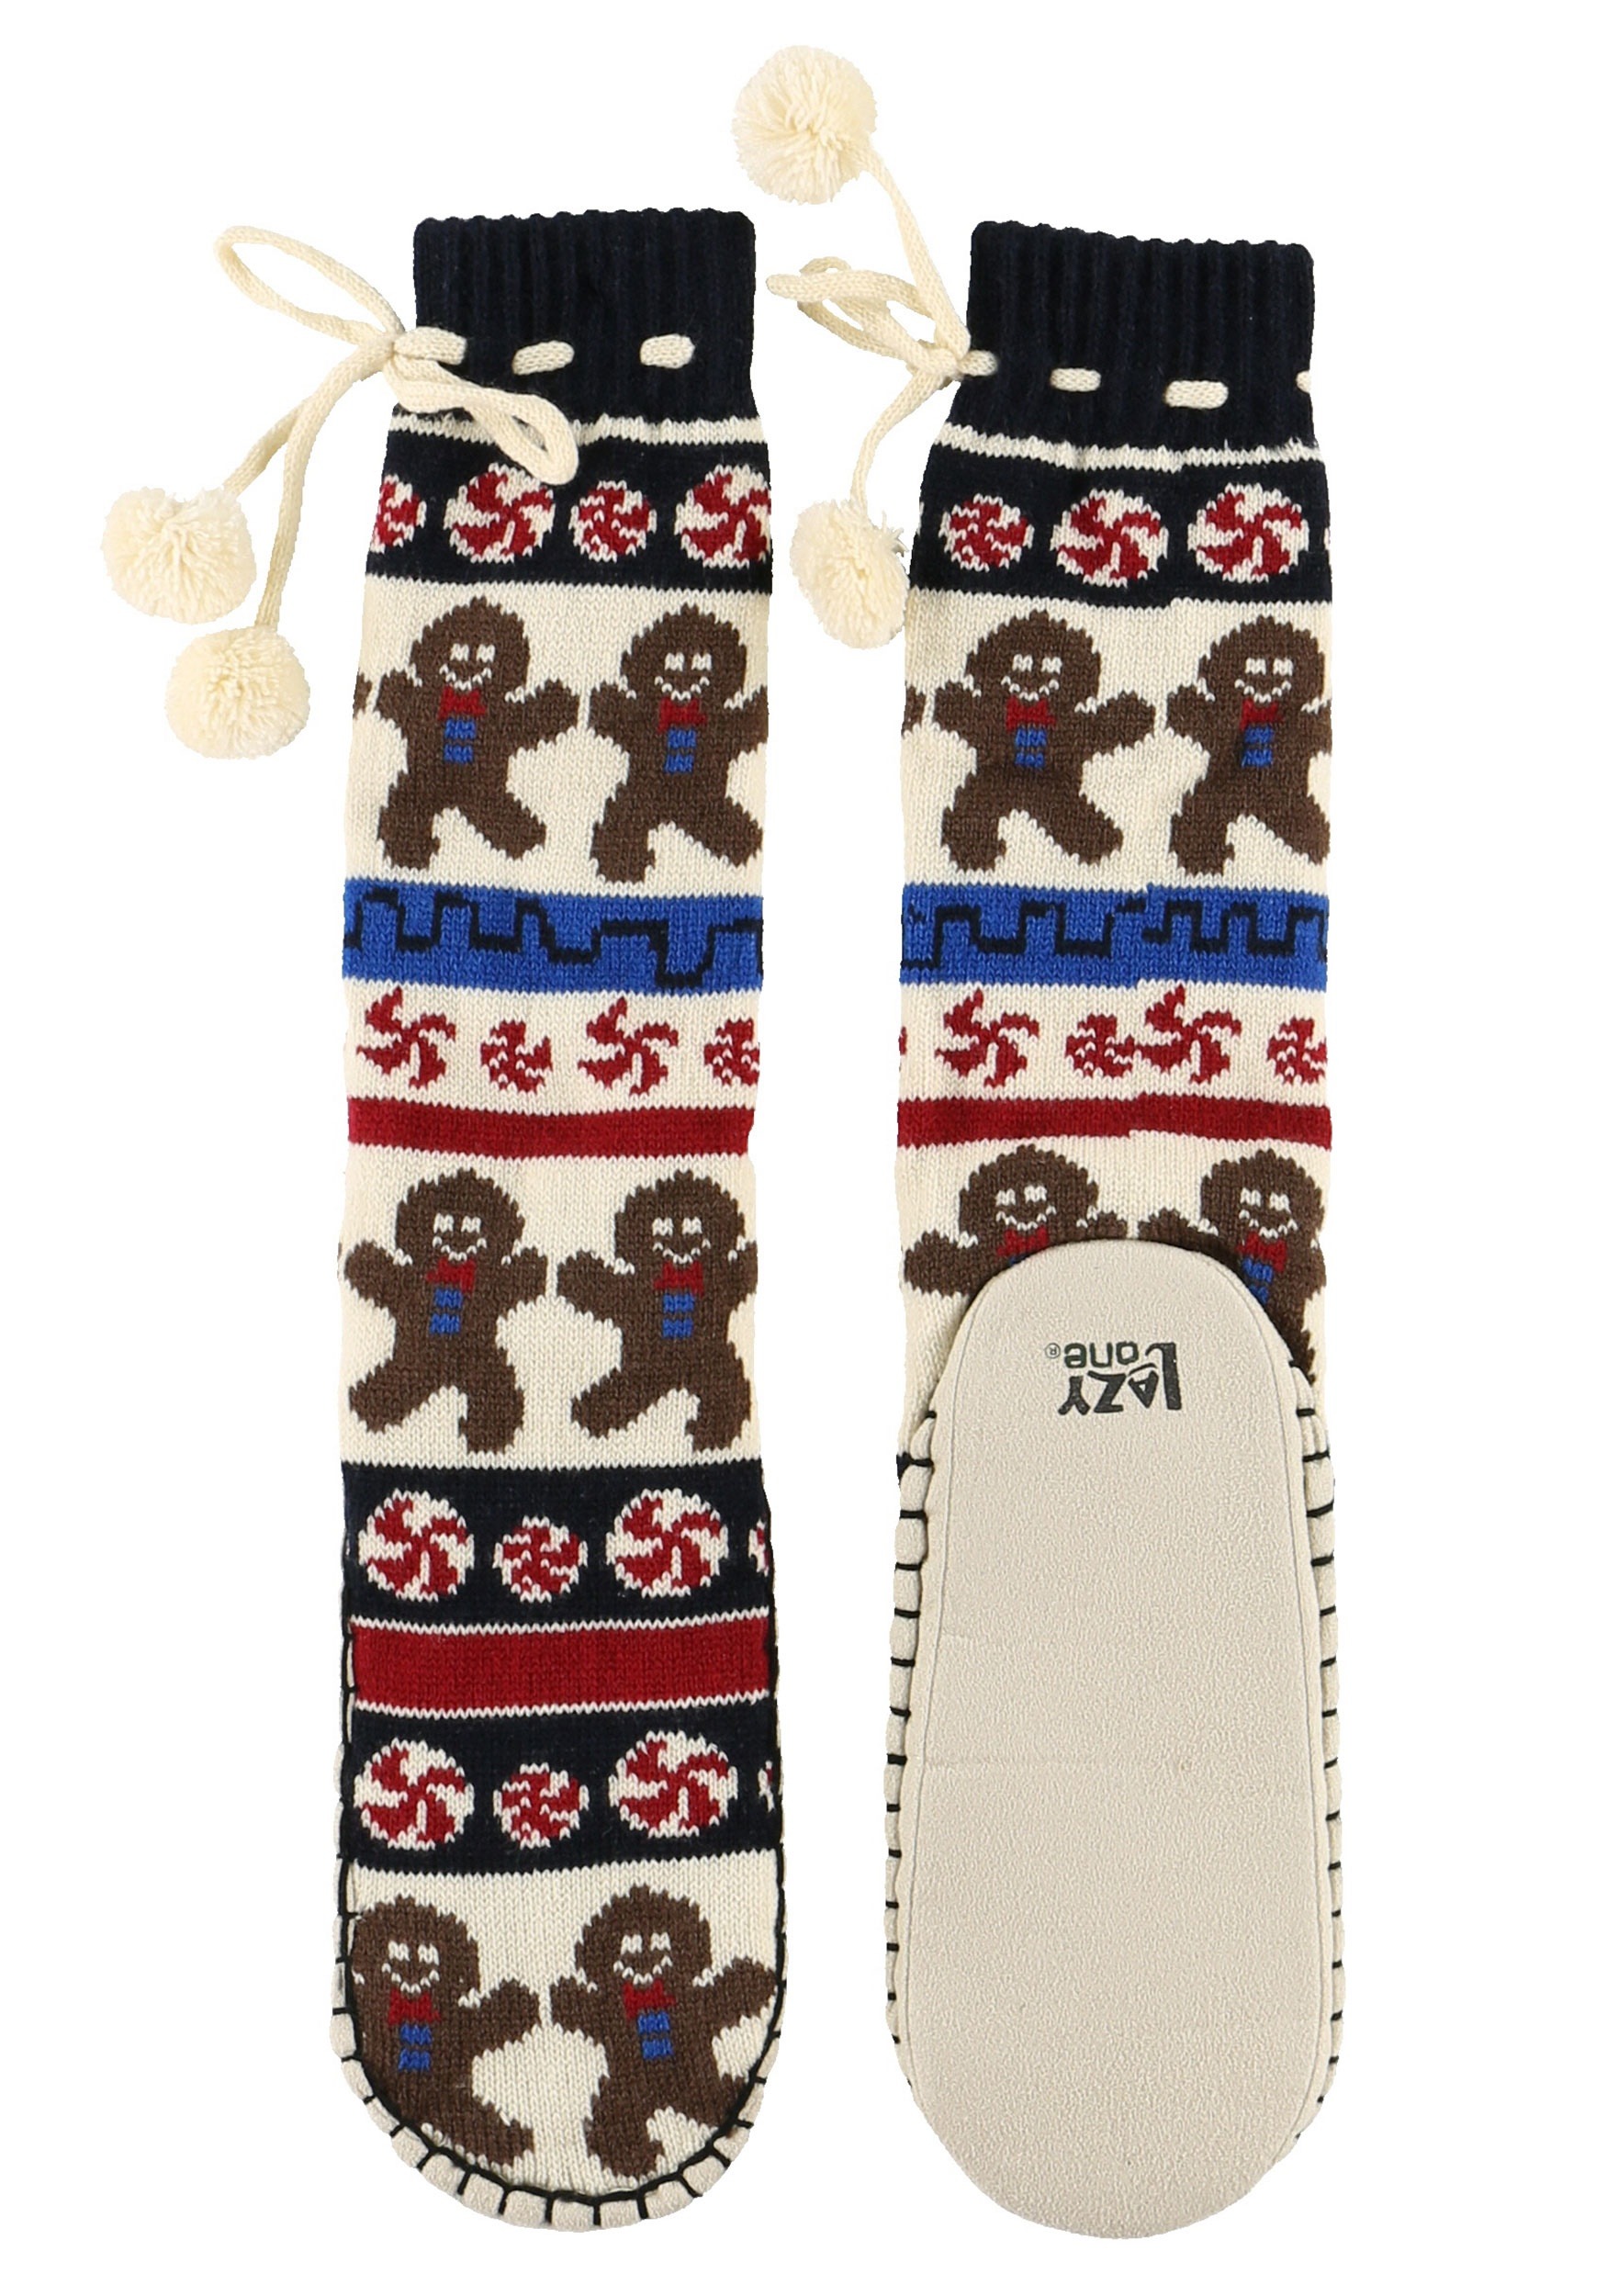 Gingerbread Adult Mukluk Slippers